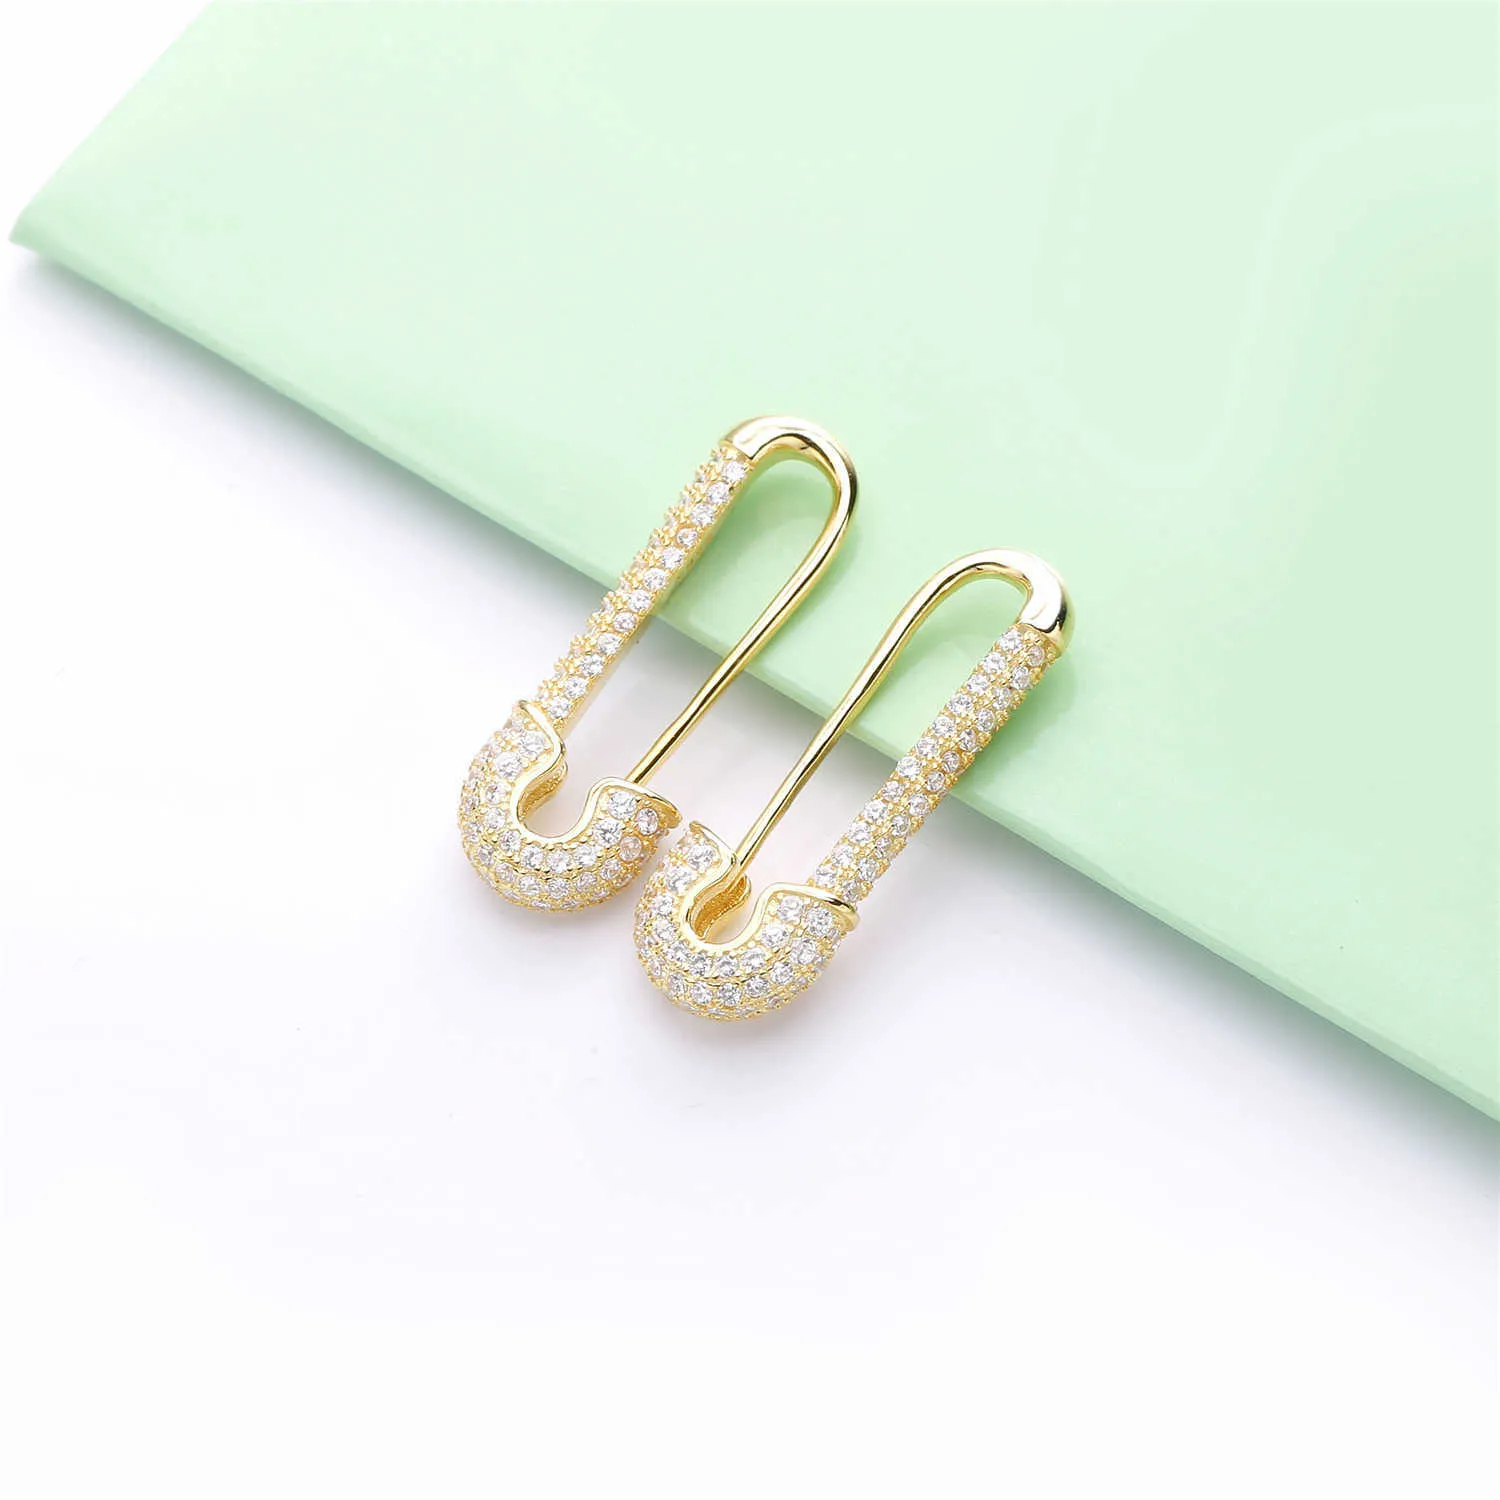 Moonmory France 100％925 Sterling Silver Safety Pin Earring 3色のスタイル片側ジルコン右左210616259U